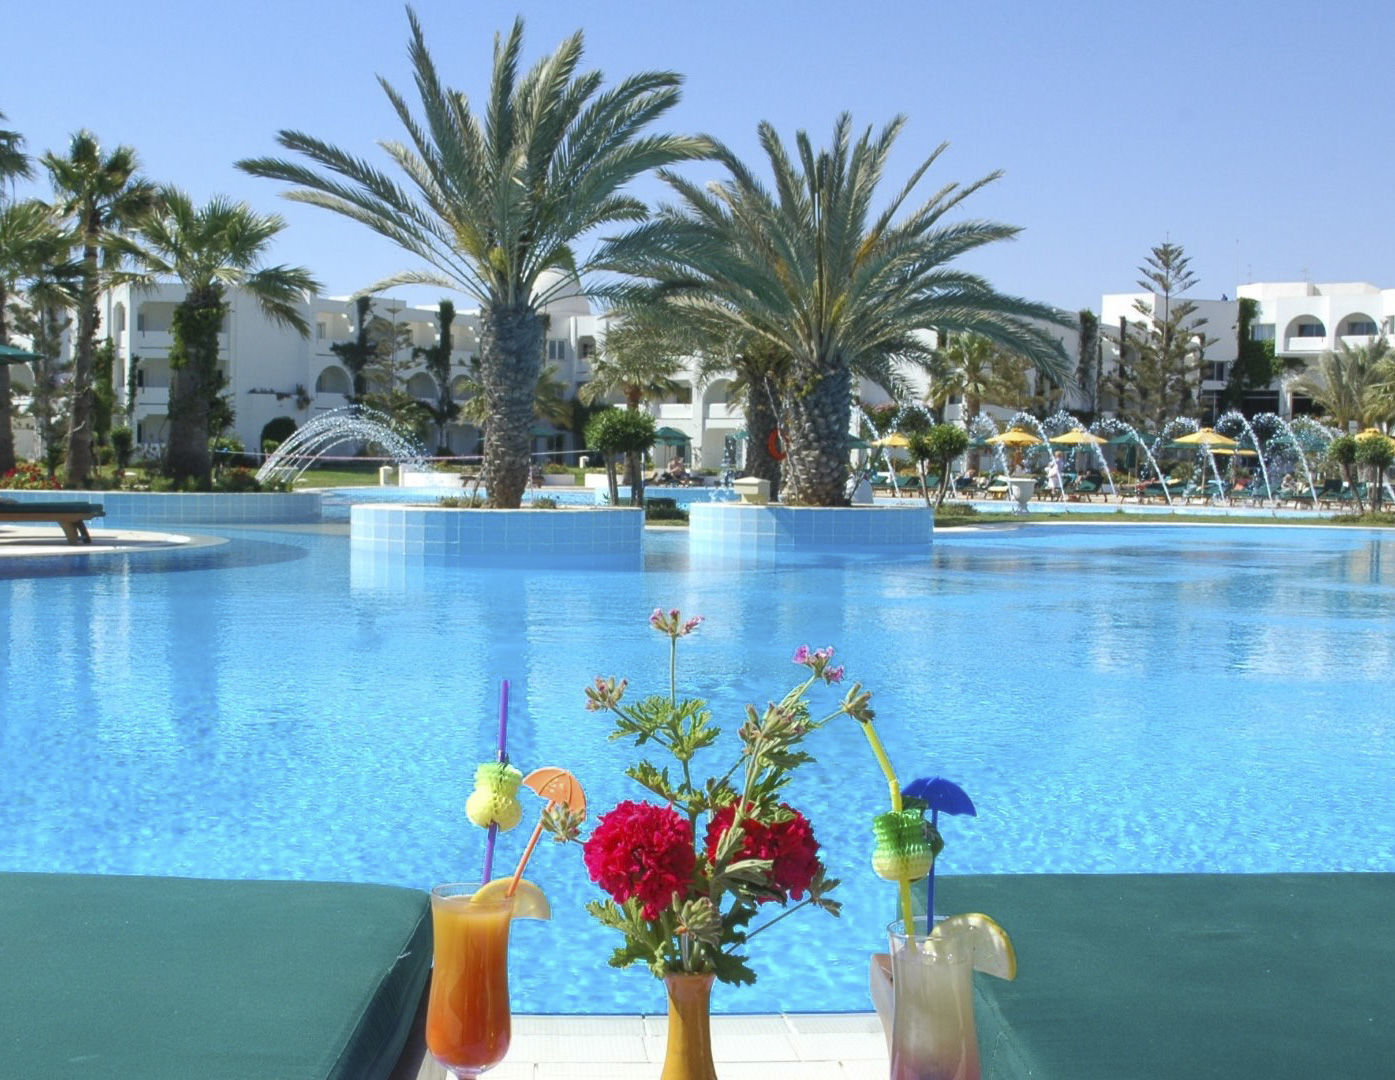 Pays Bas, pays aux mille canaux - Djerba Plaza Thalasso & Spa